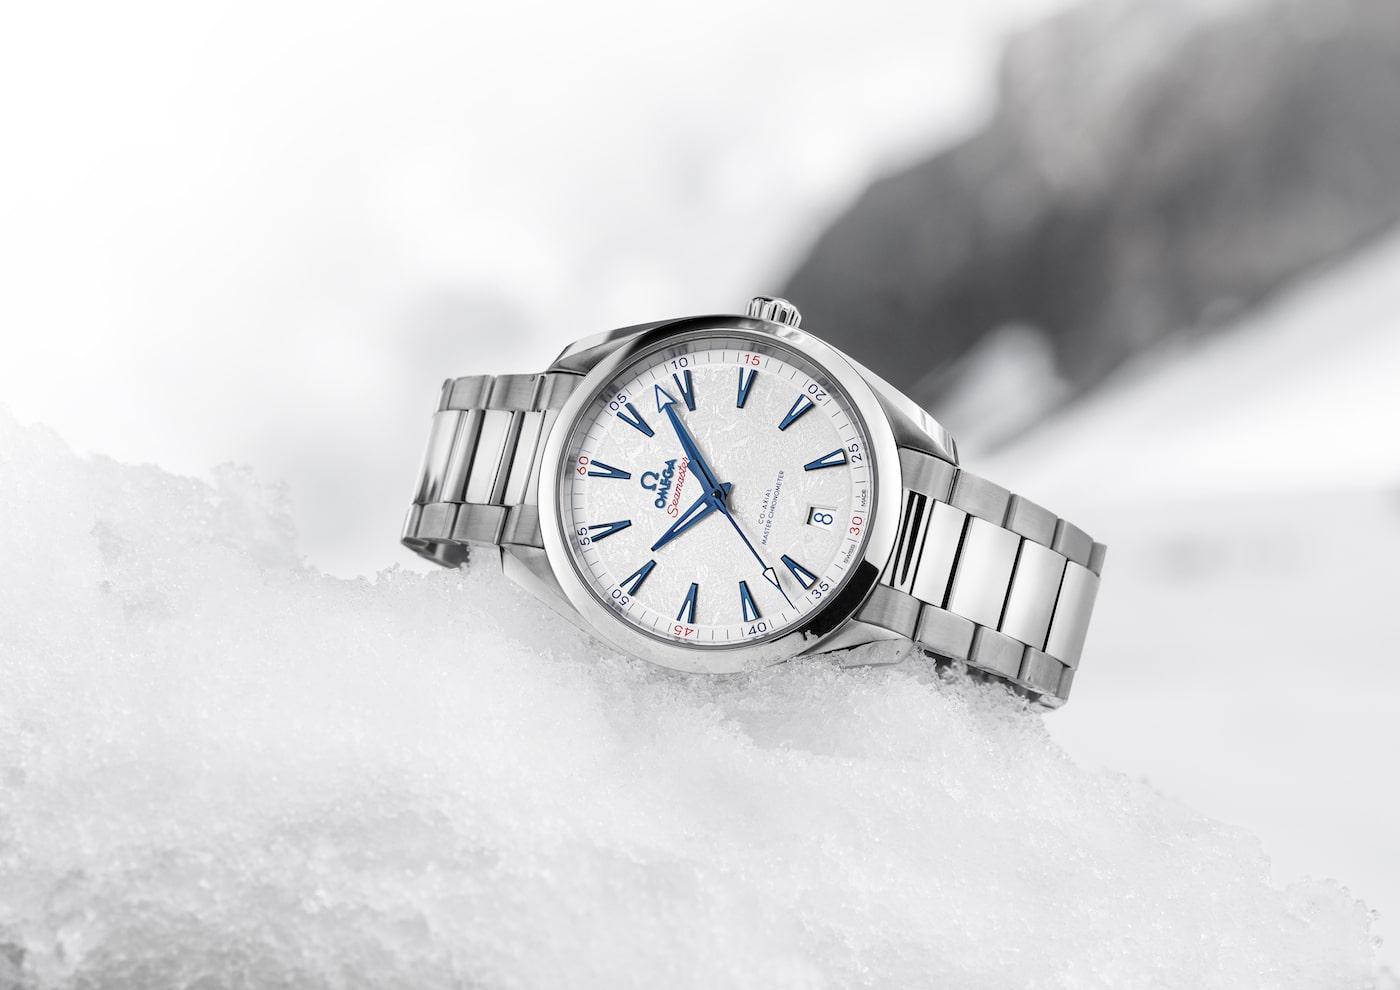 The ice-inspired omega watch for beijing 2022